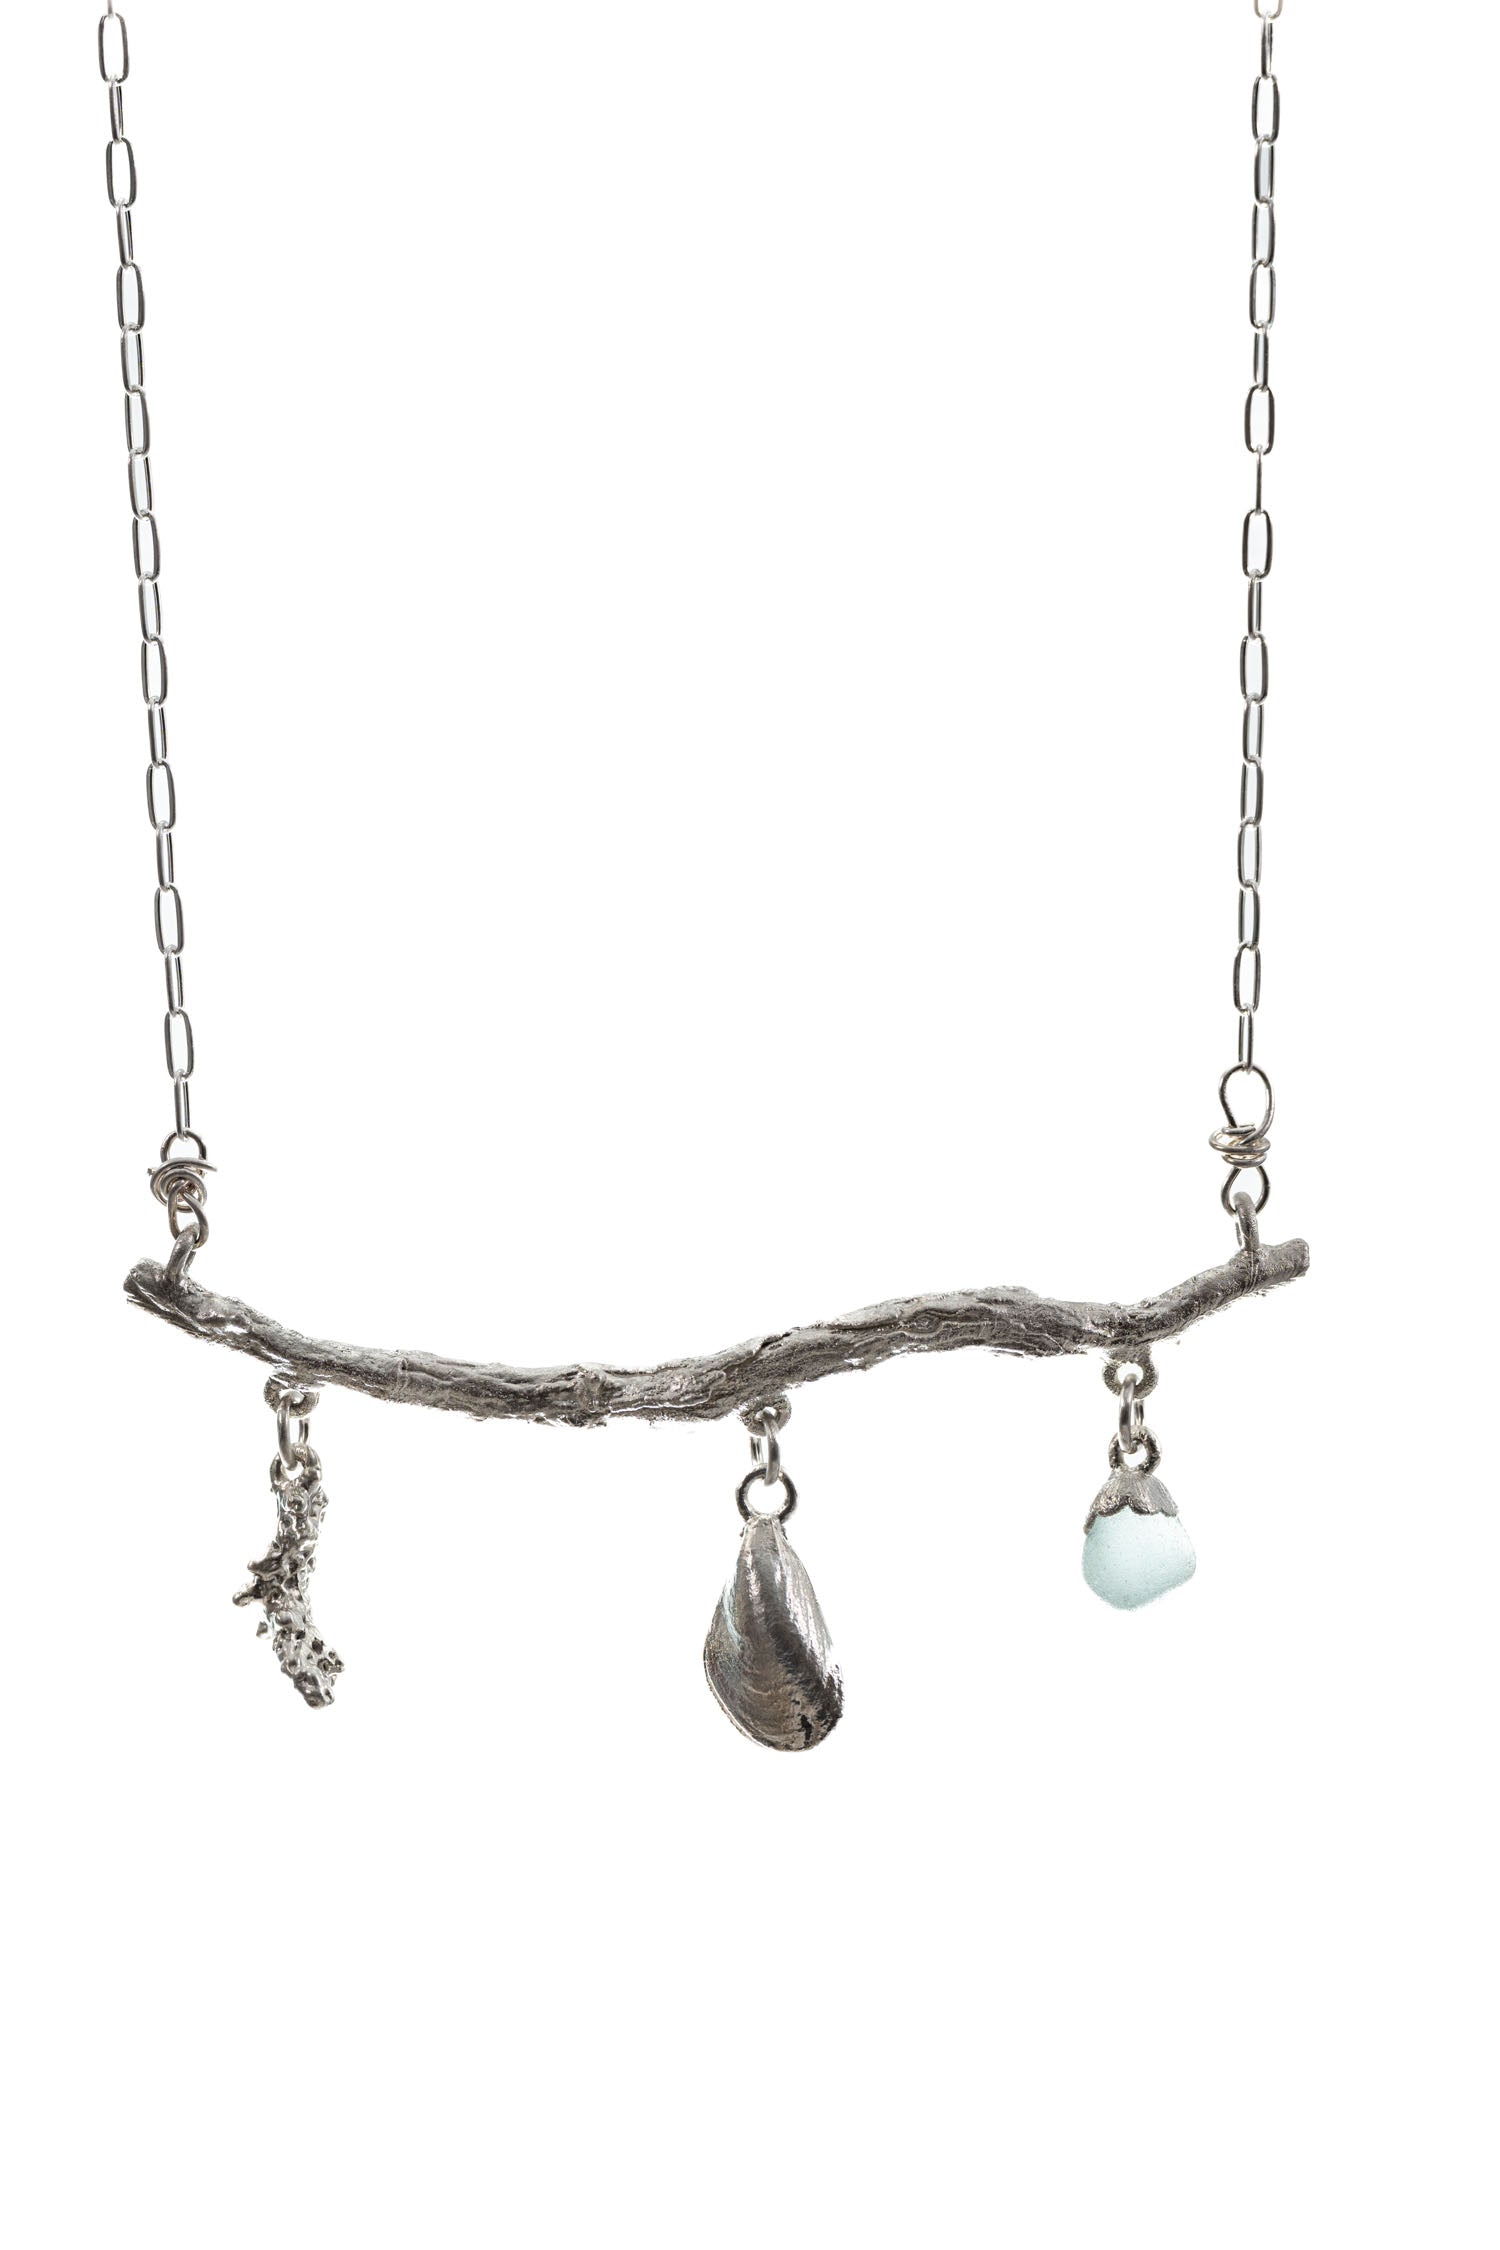 beachcomber's necklace silver shells, sea glass, and driftwood